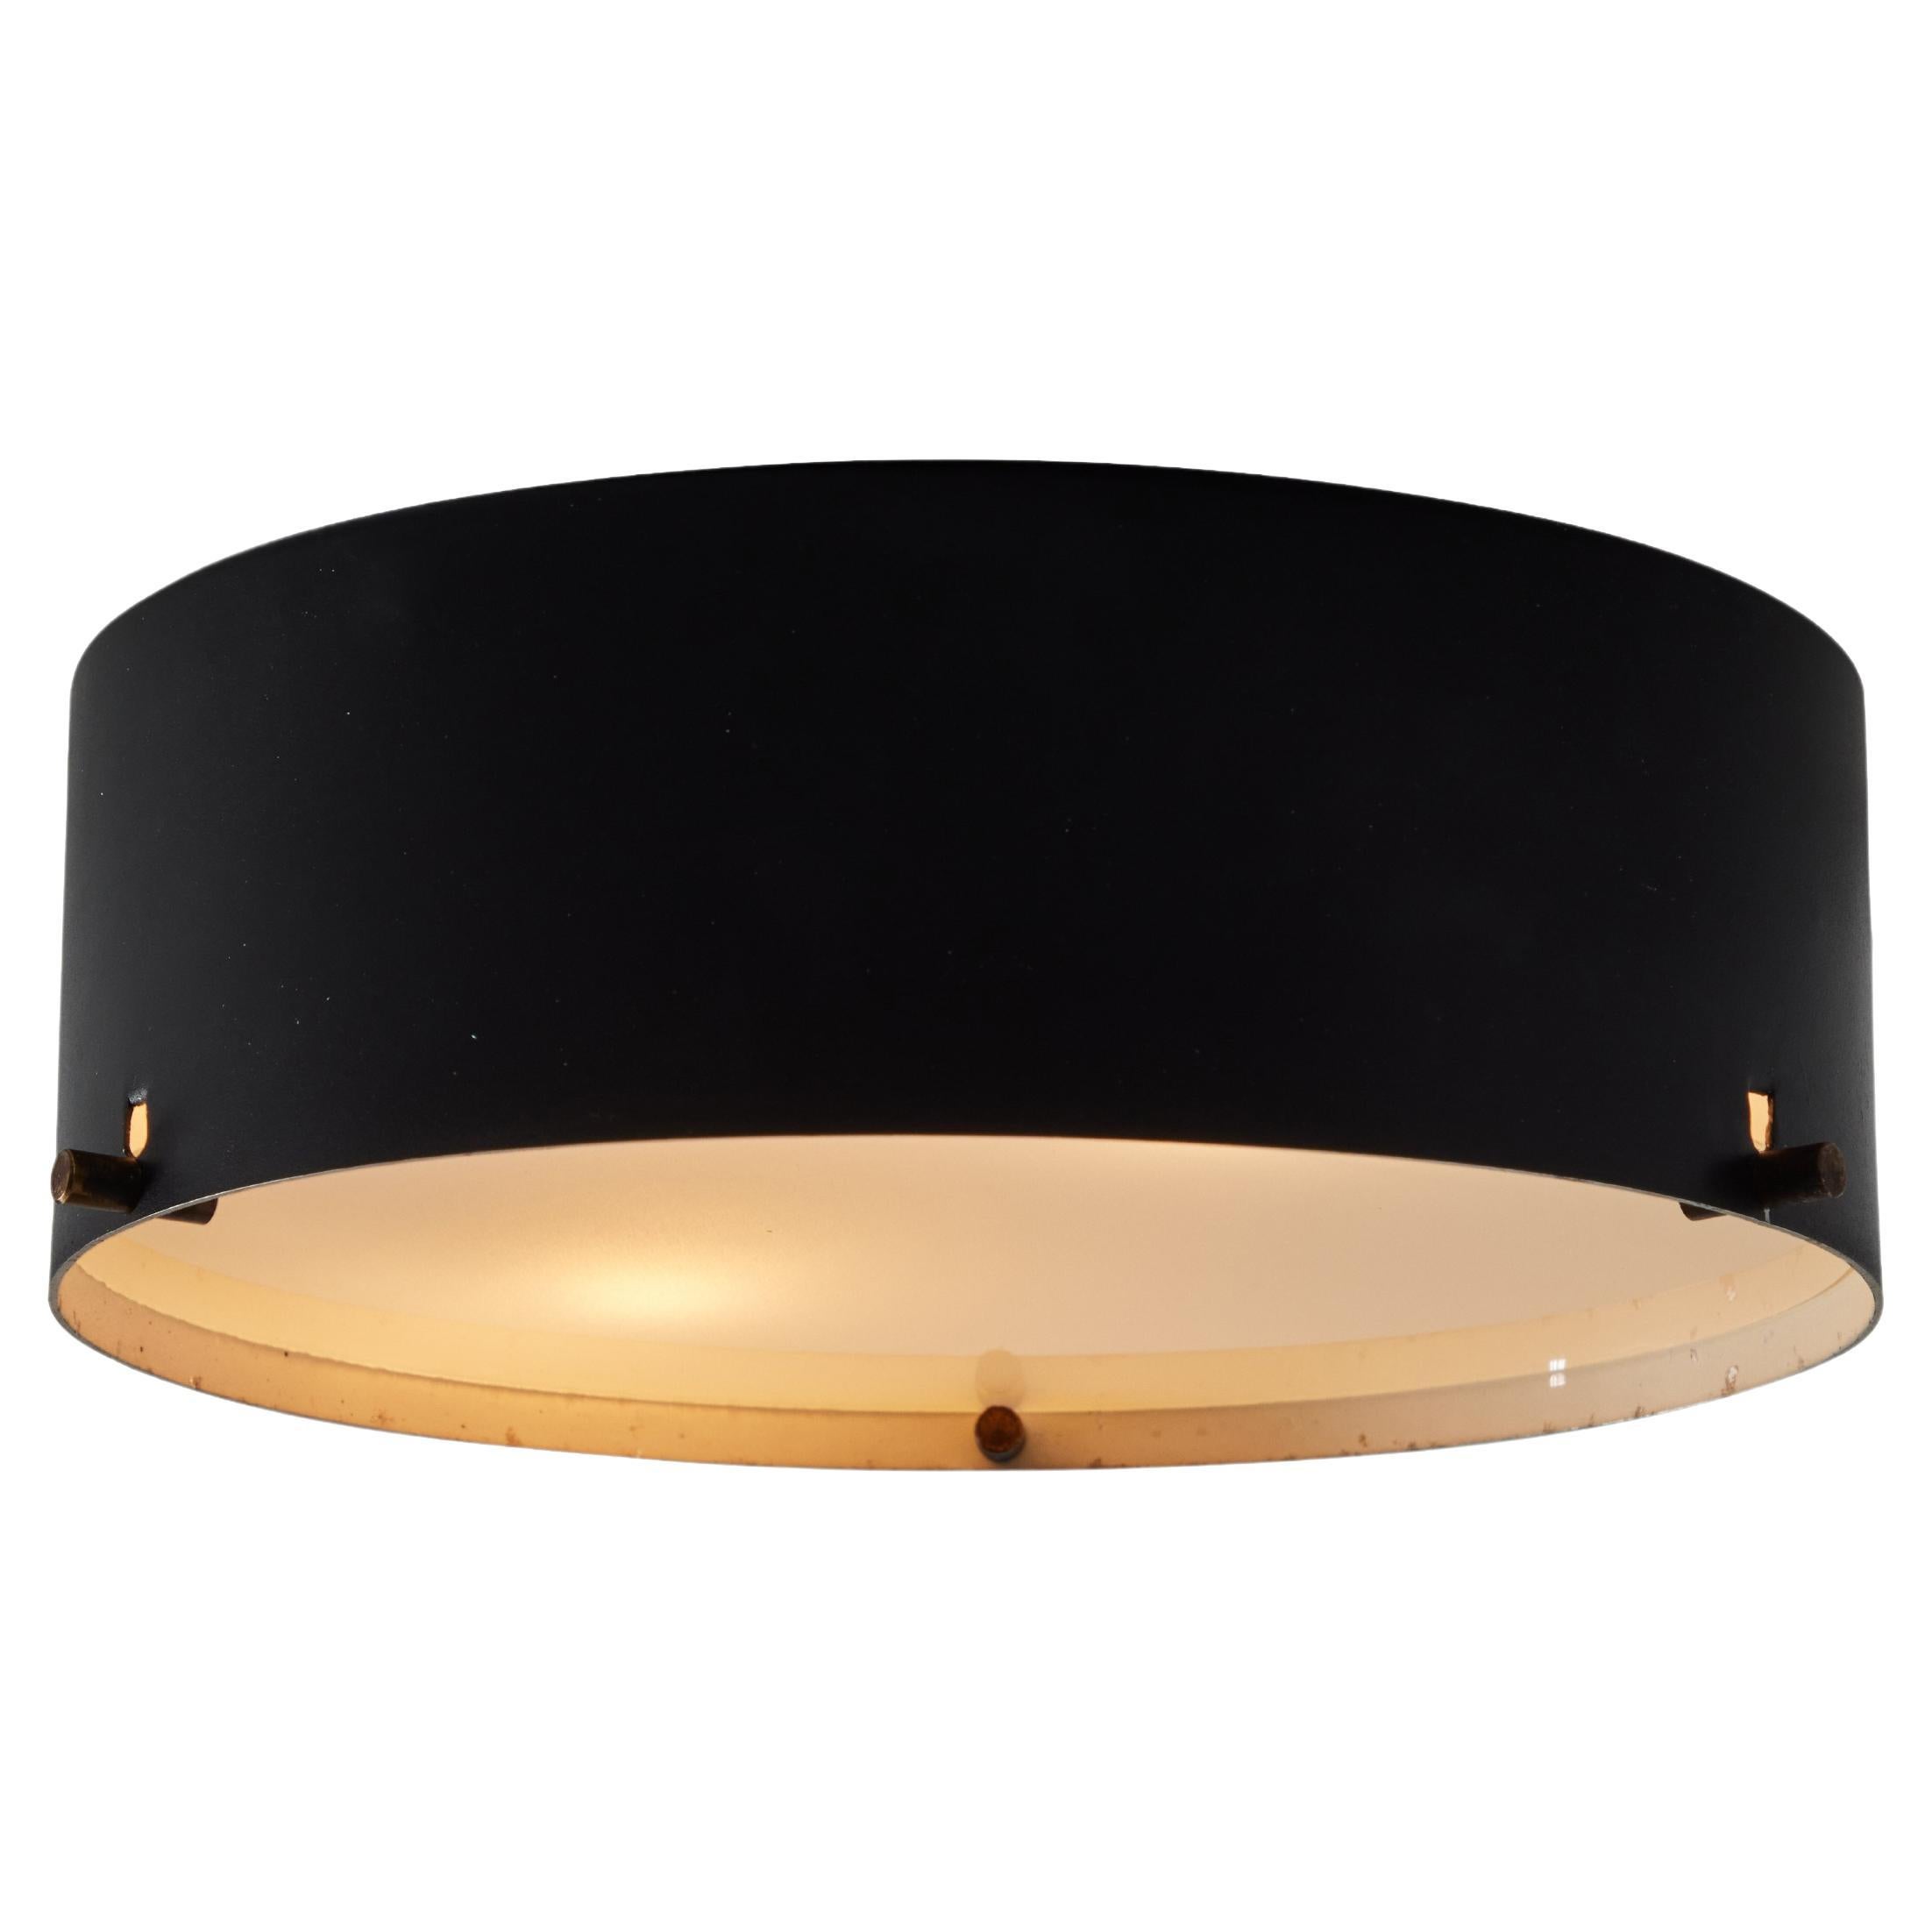 1950s Black Metal and Opaline Glass Ceiling Lamp by Bruno Gatta for Stilnovo